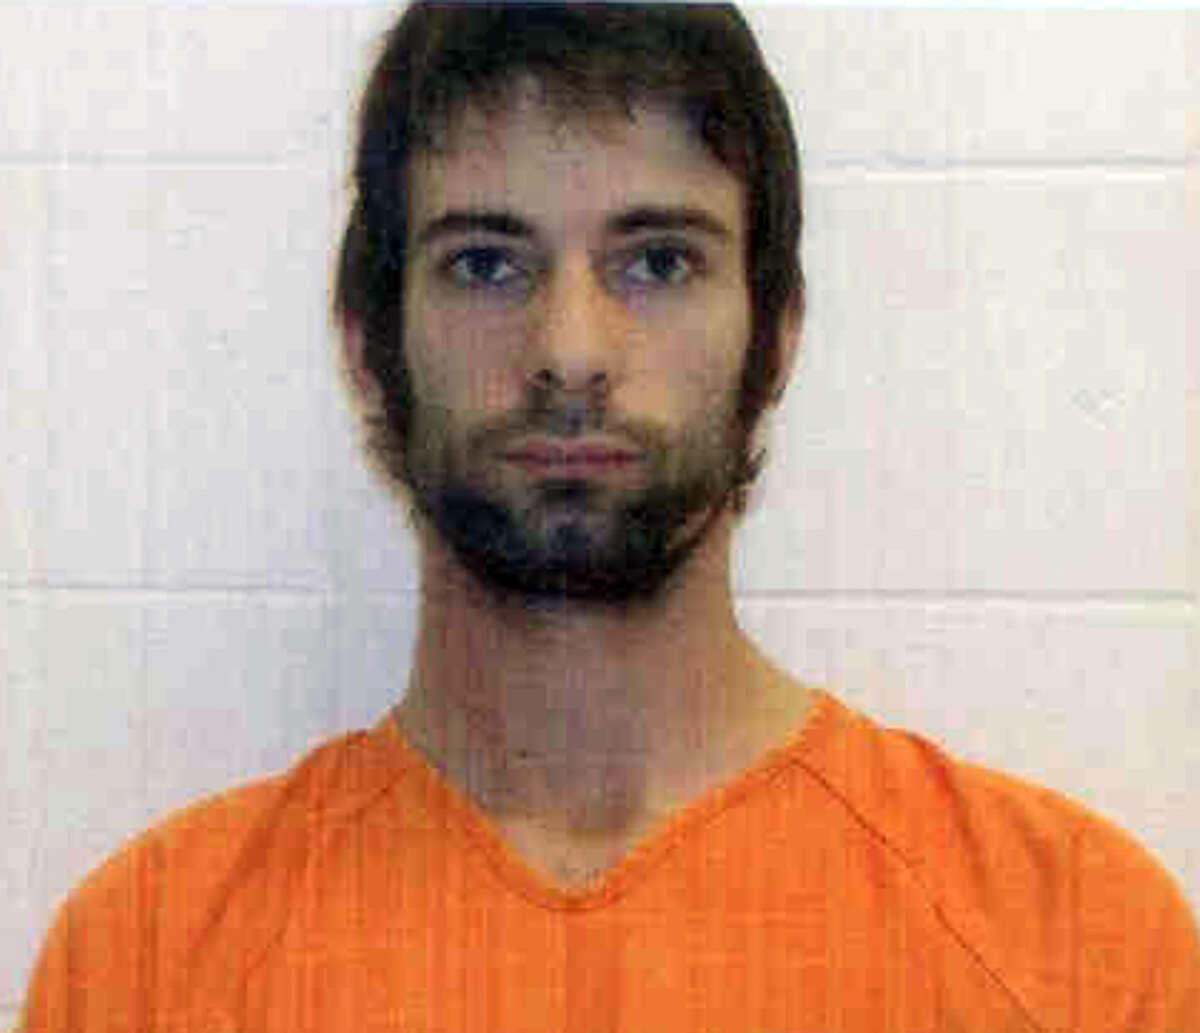 Troubled Iraq war veteran Eddie Ray Routh faces two counts of murder. (AP Photo/ Erath County Sheriff's Office)